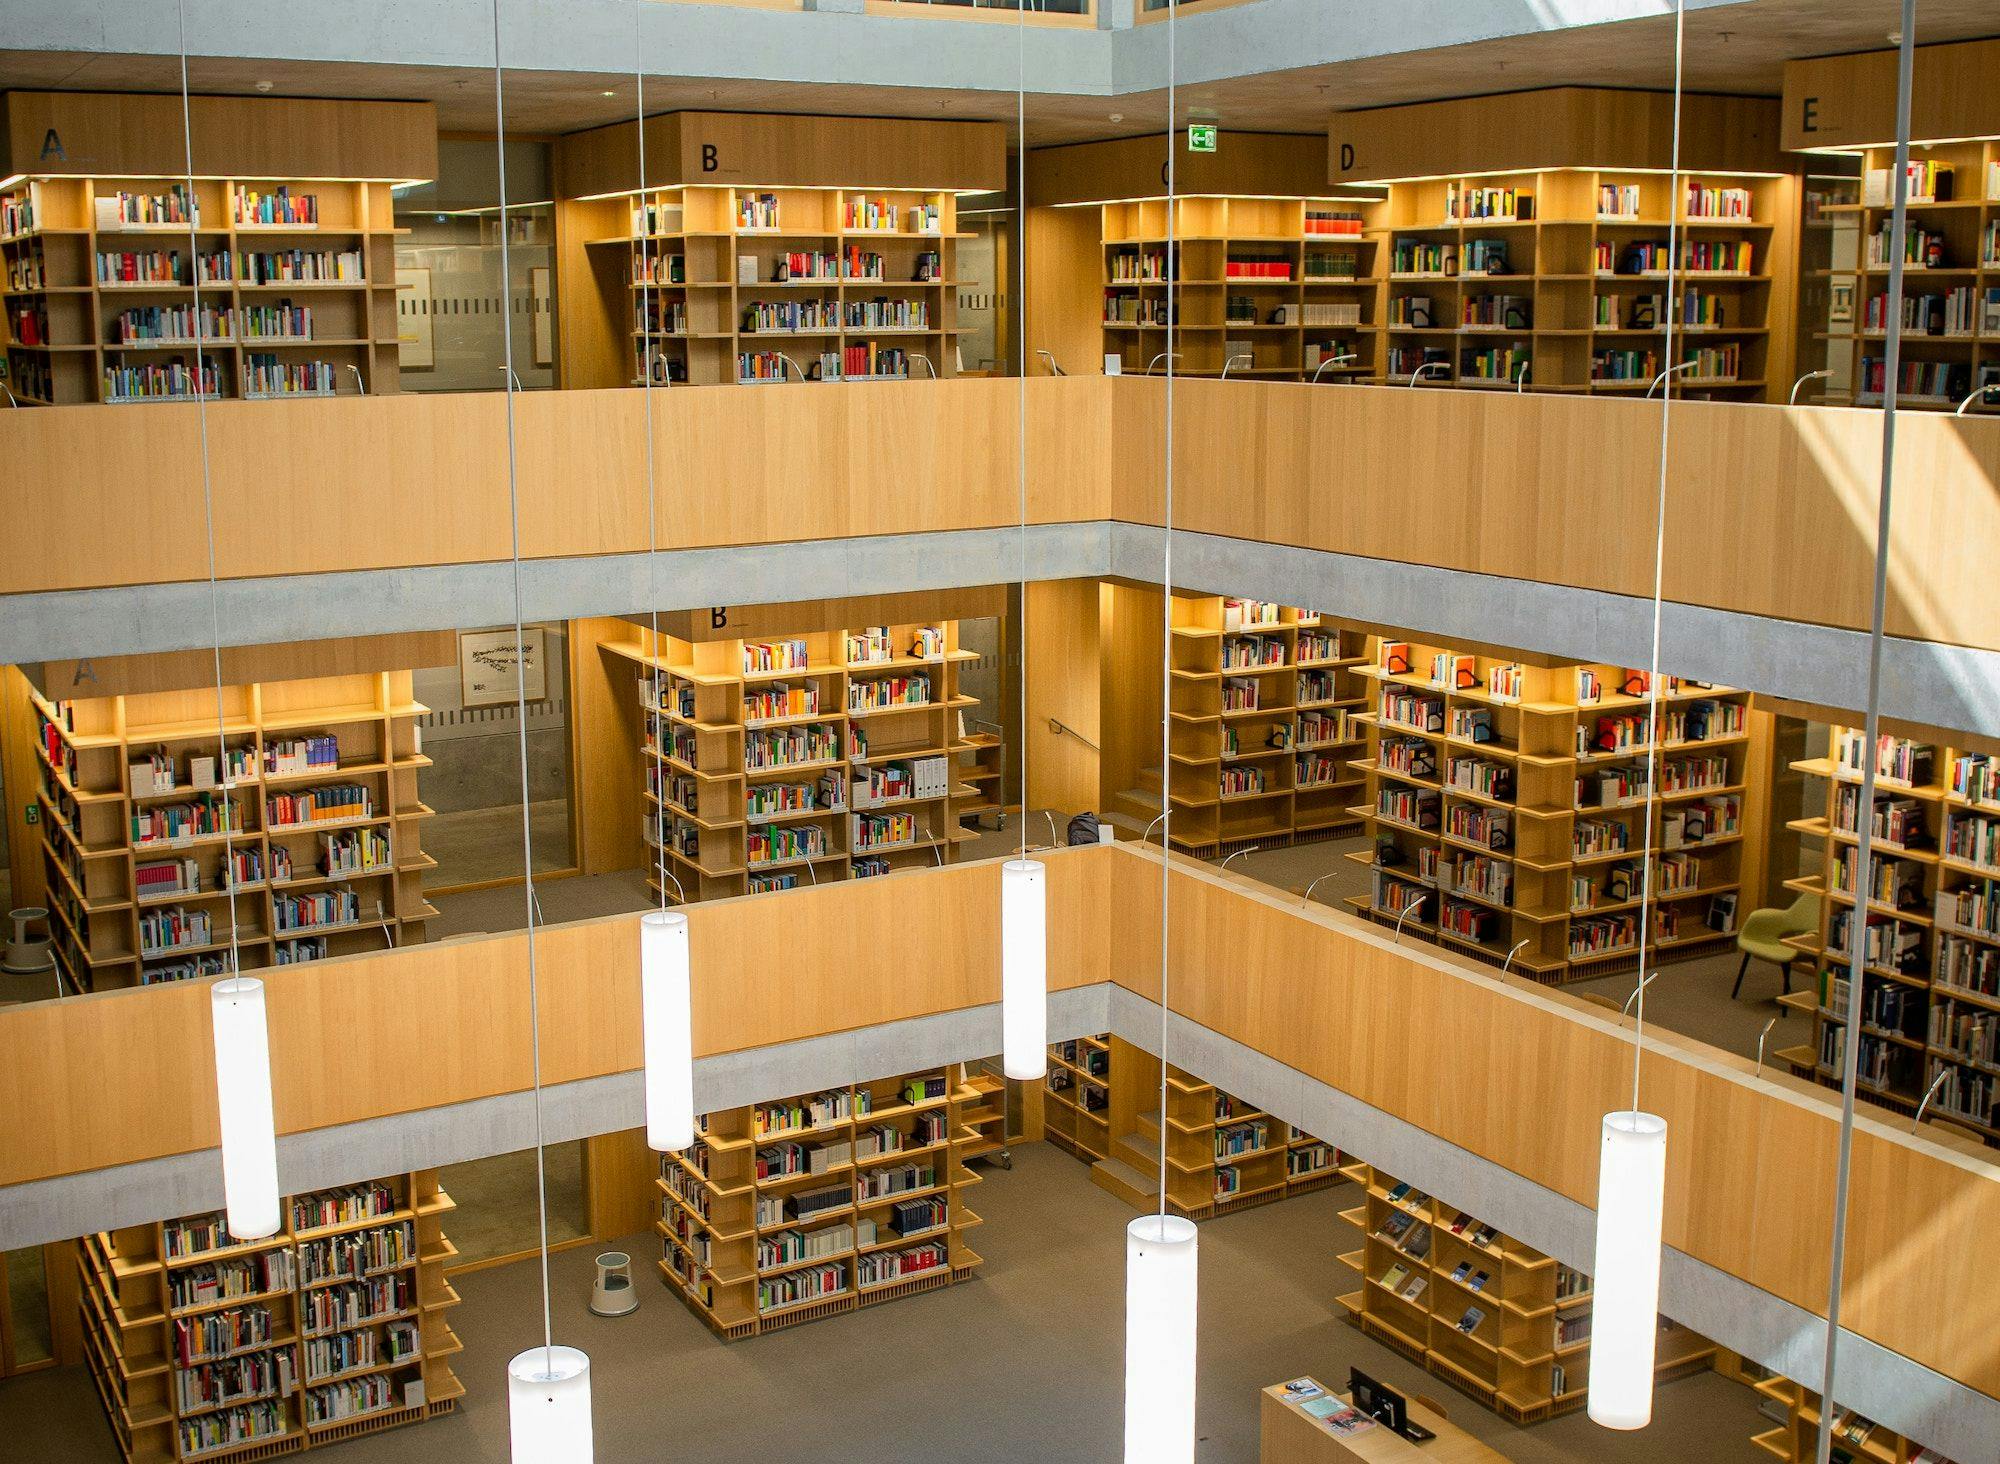 A photo of several floors of a library, with stacks of books